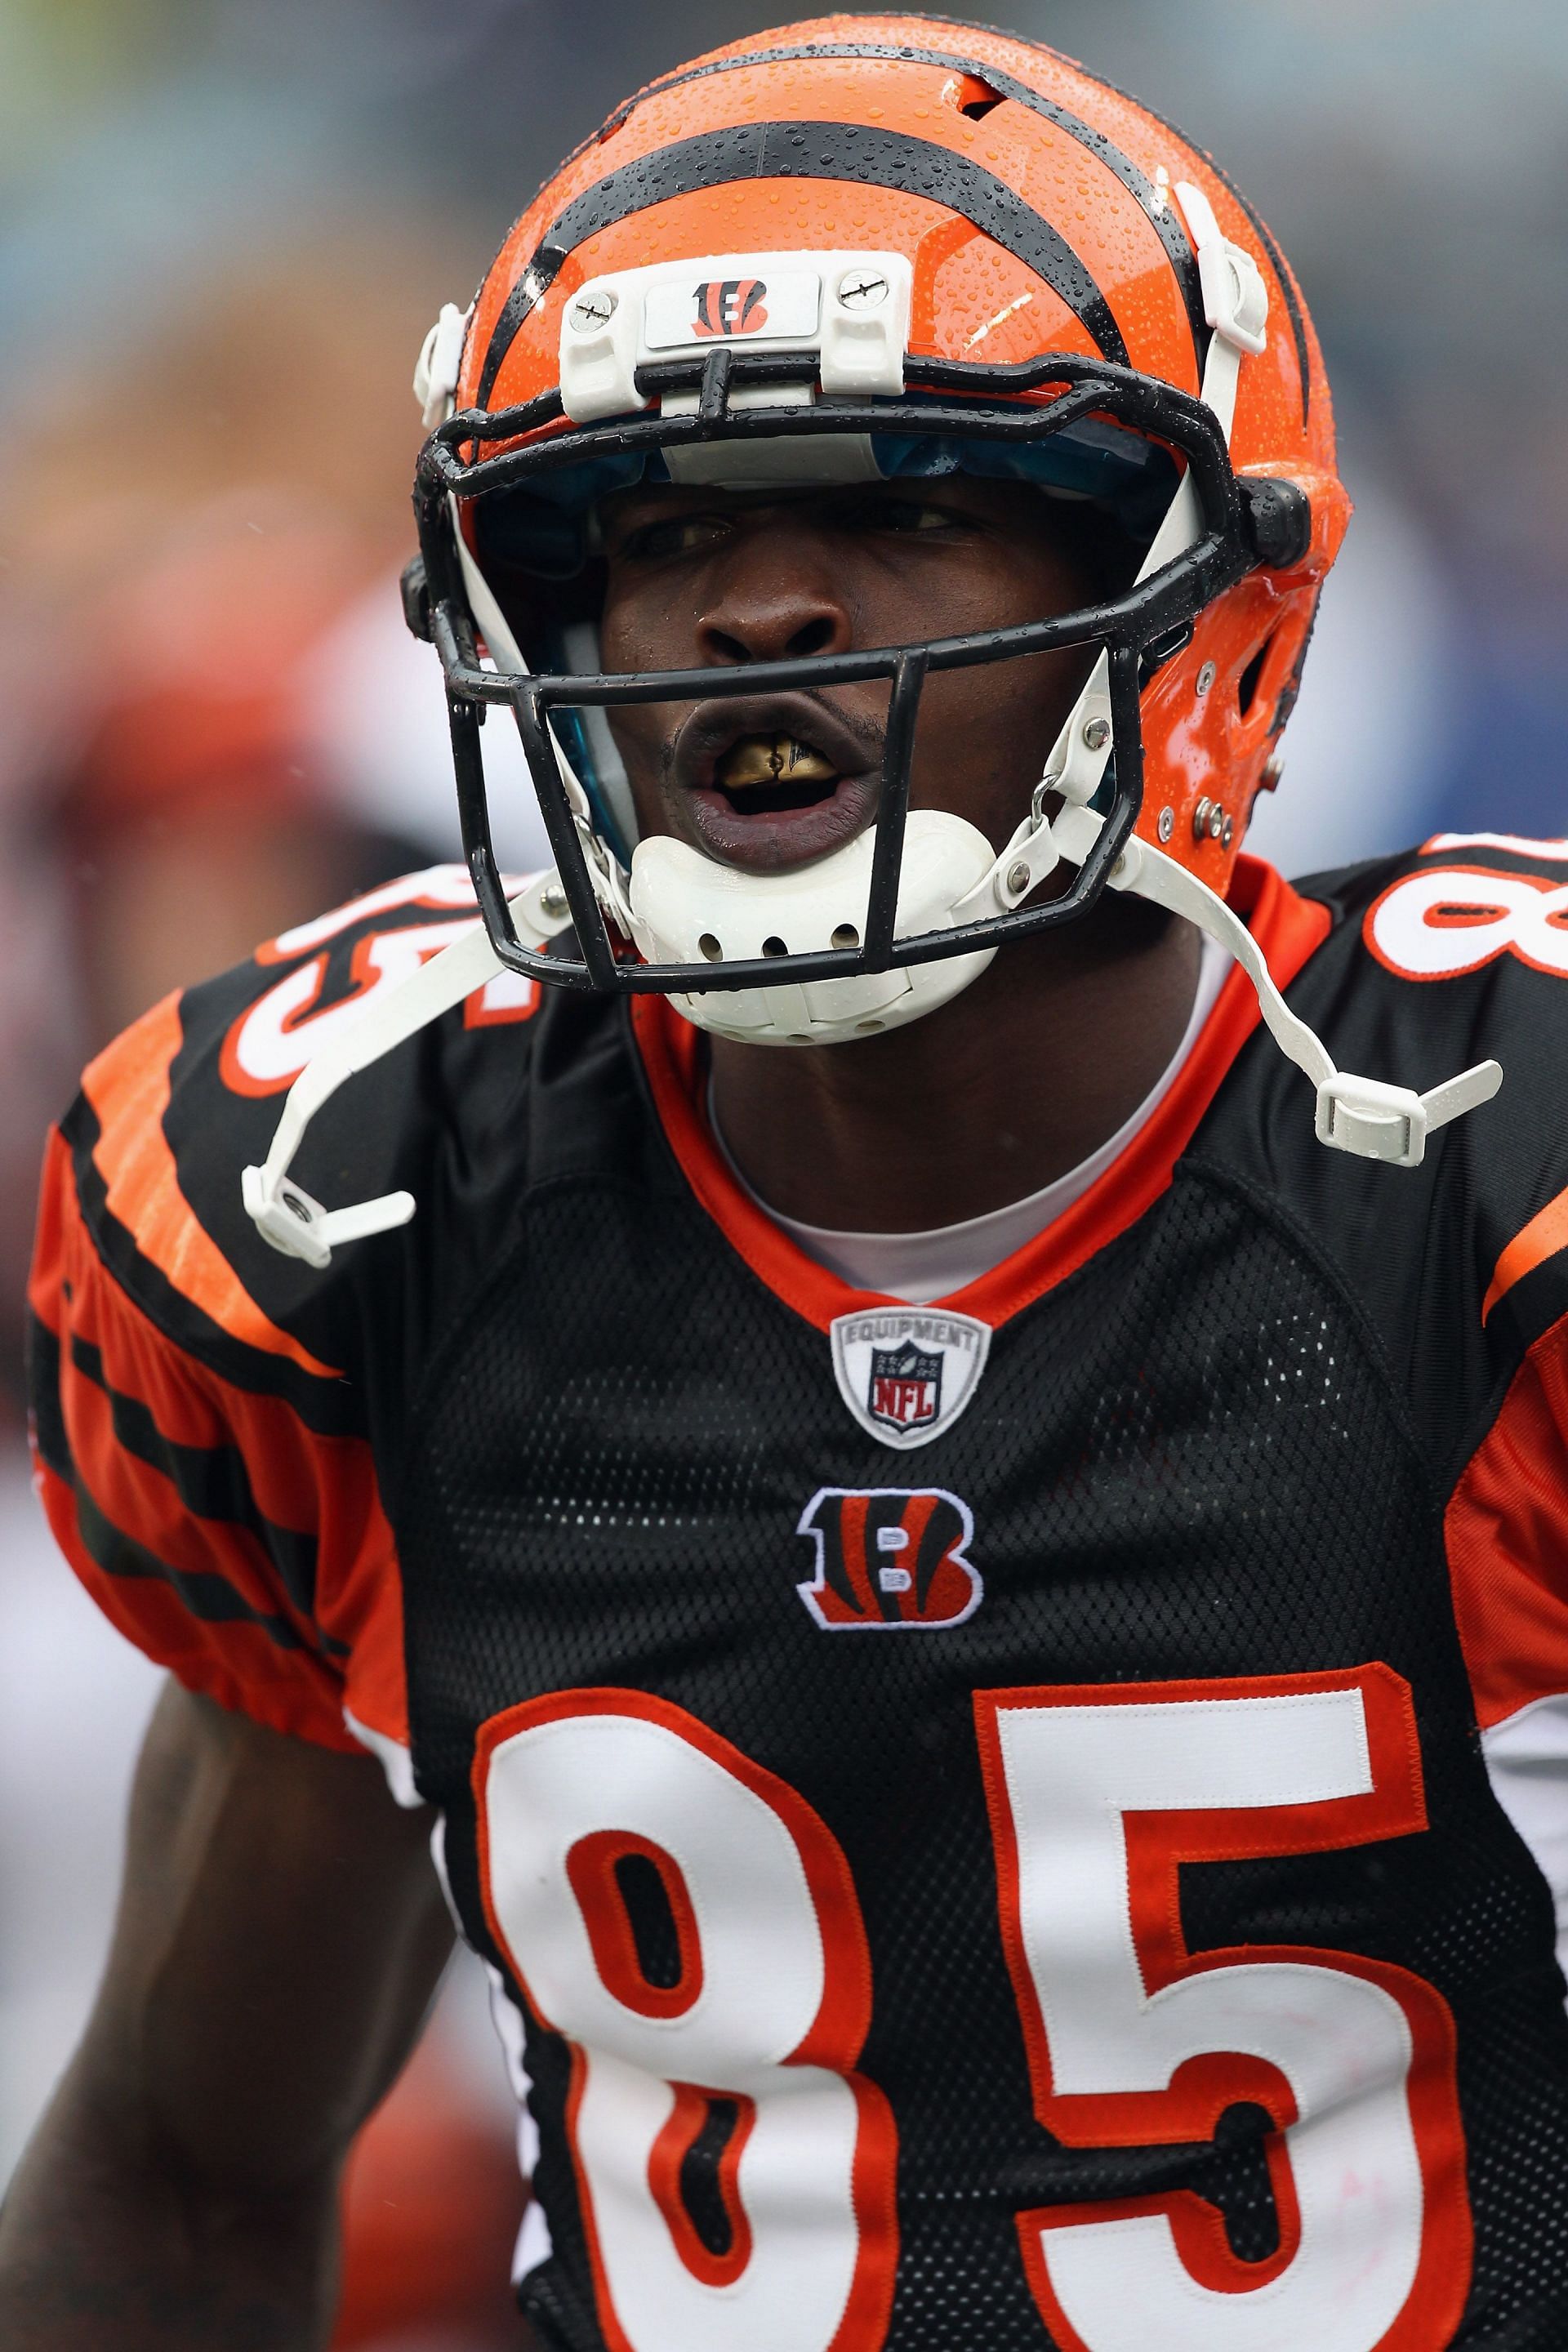 Chad Johnson as a member of the Cincinnati Bengals from 2001 - 2010